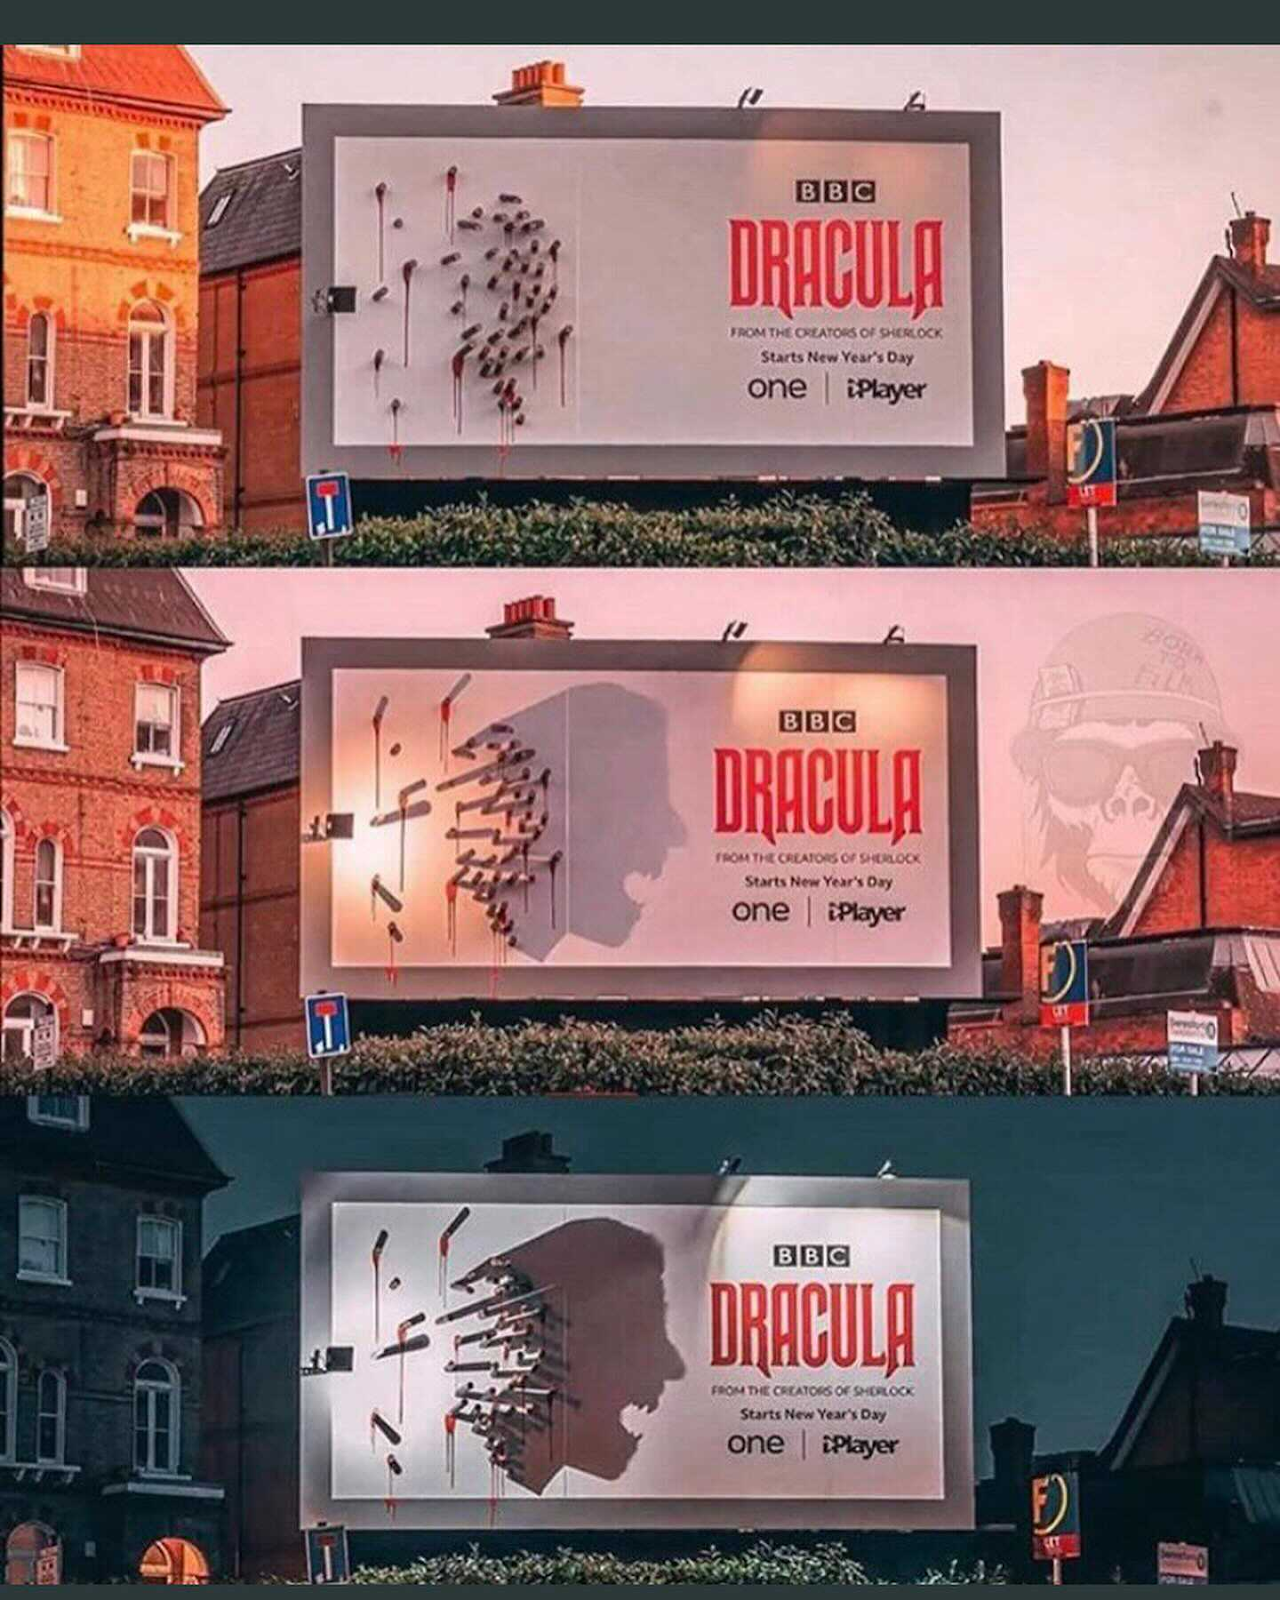 The innovative Dracula billboard that shows the transformation of an almost bland billboard with a few stakes lodged into it. This changes at night when the stakes create the iconic silhouette of Dracula.